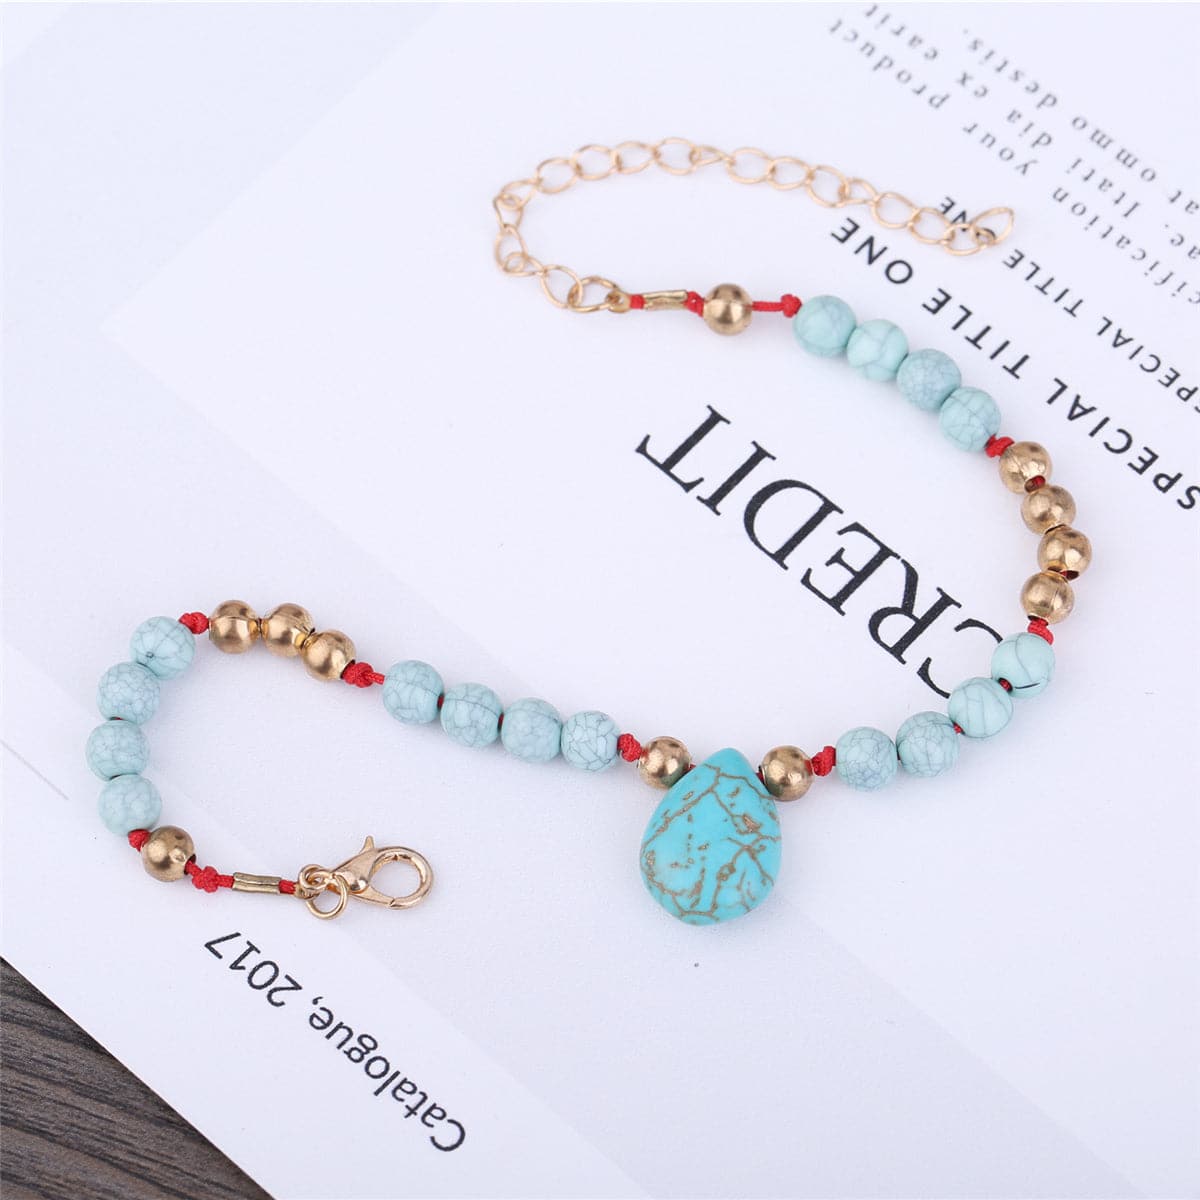 Teal Turquoise & 18K Gold-Plated Drop Beaded Charm Anklet